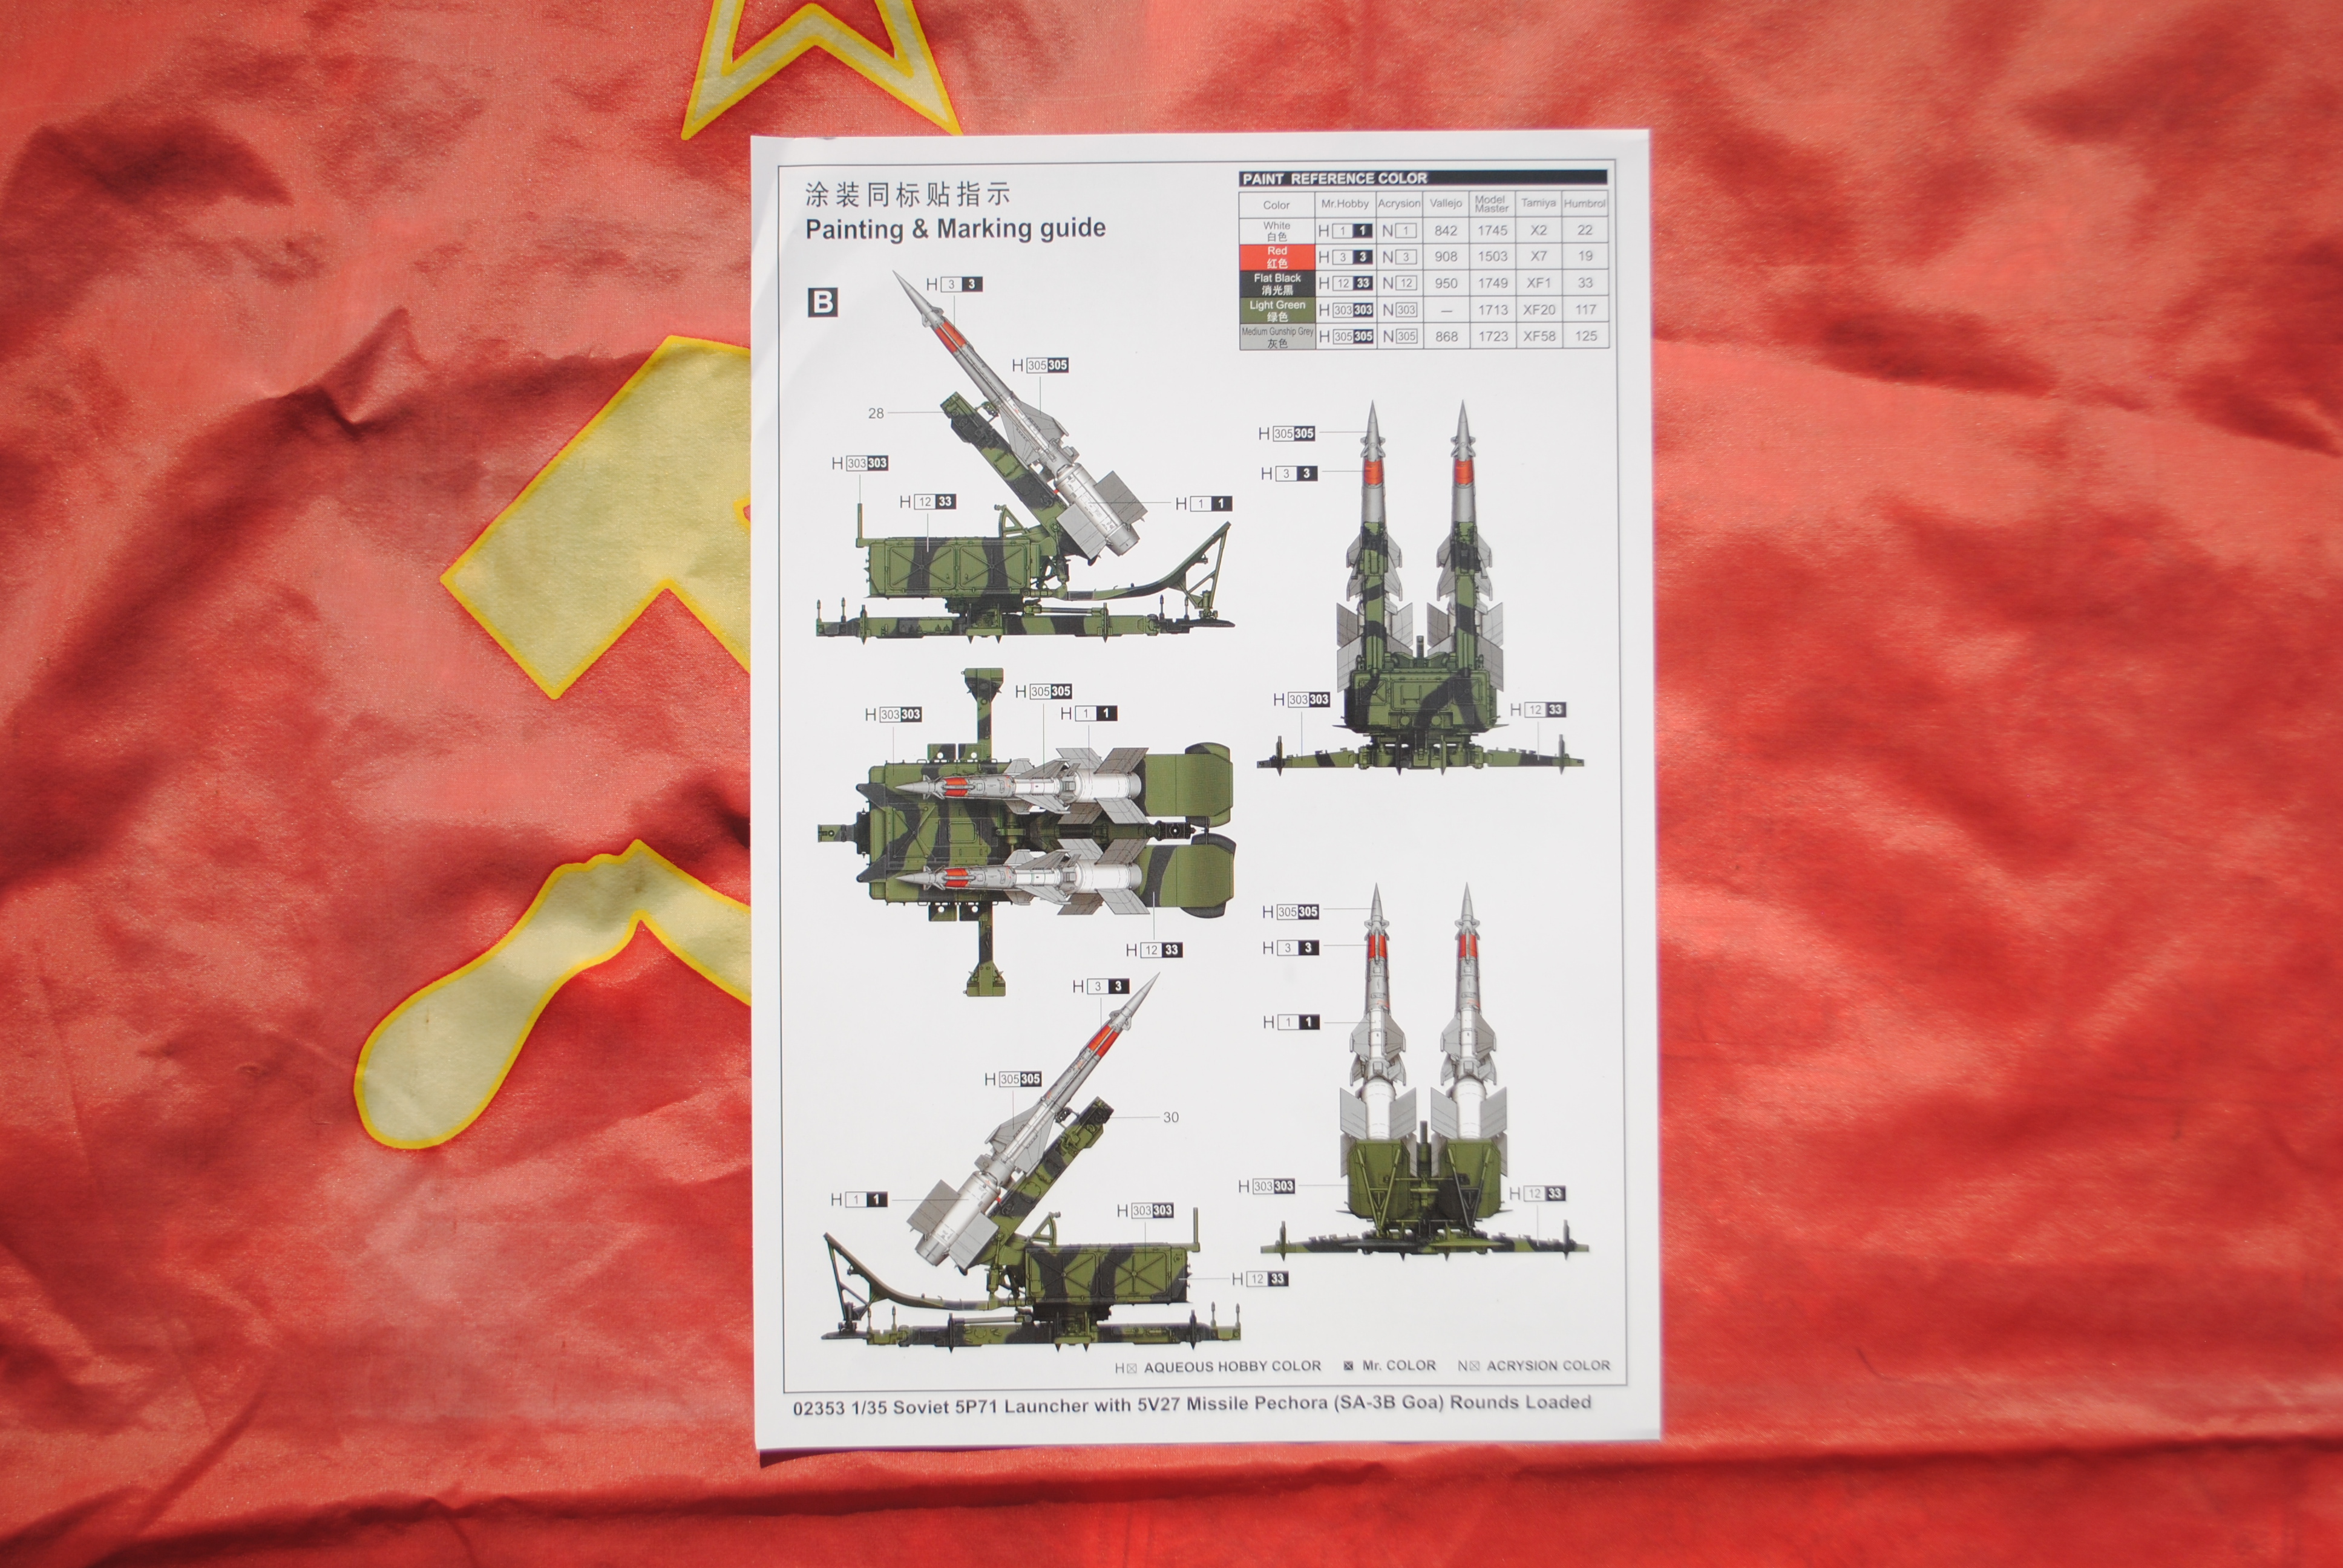 Trumpeter 02353 1/35 Soviet 5P71 Launcher with SA-3B Goa Rounds Loaded